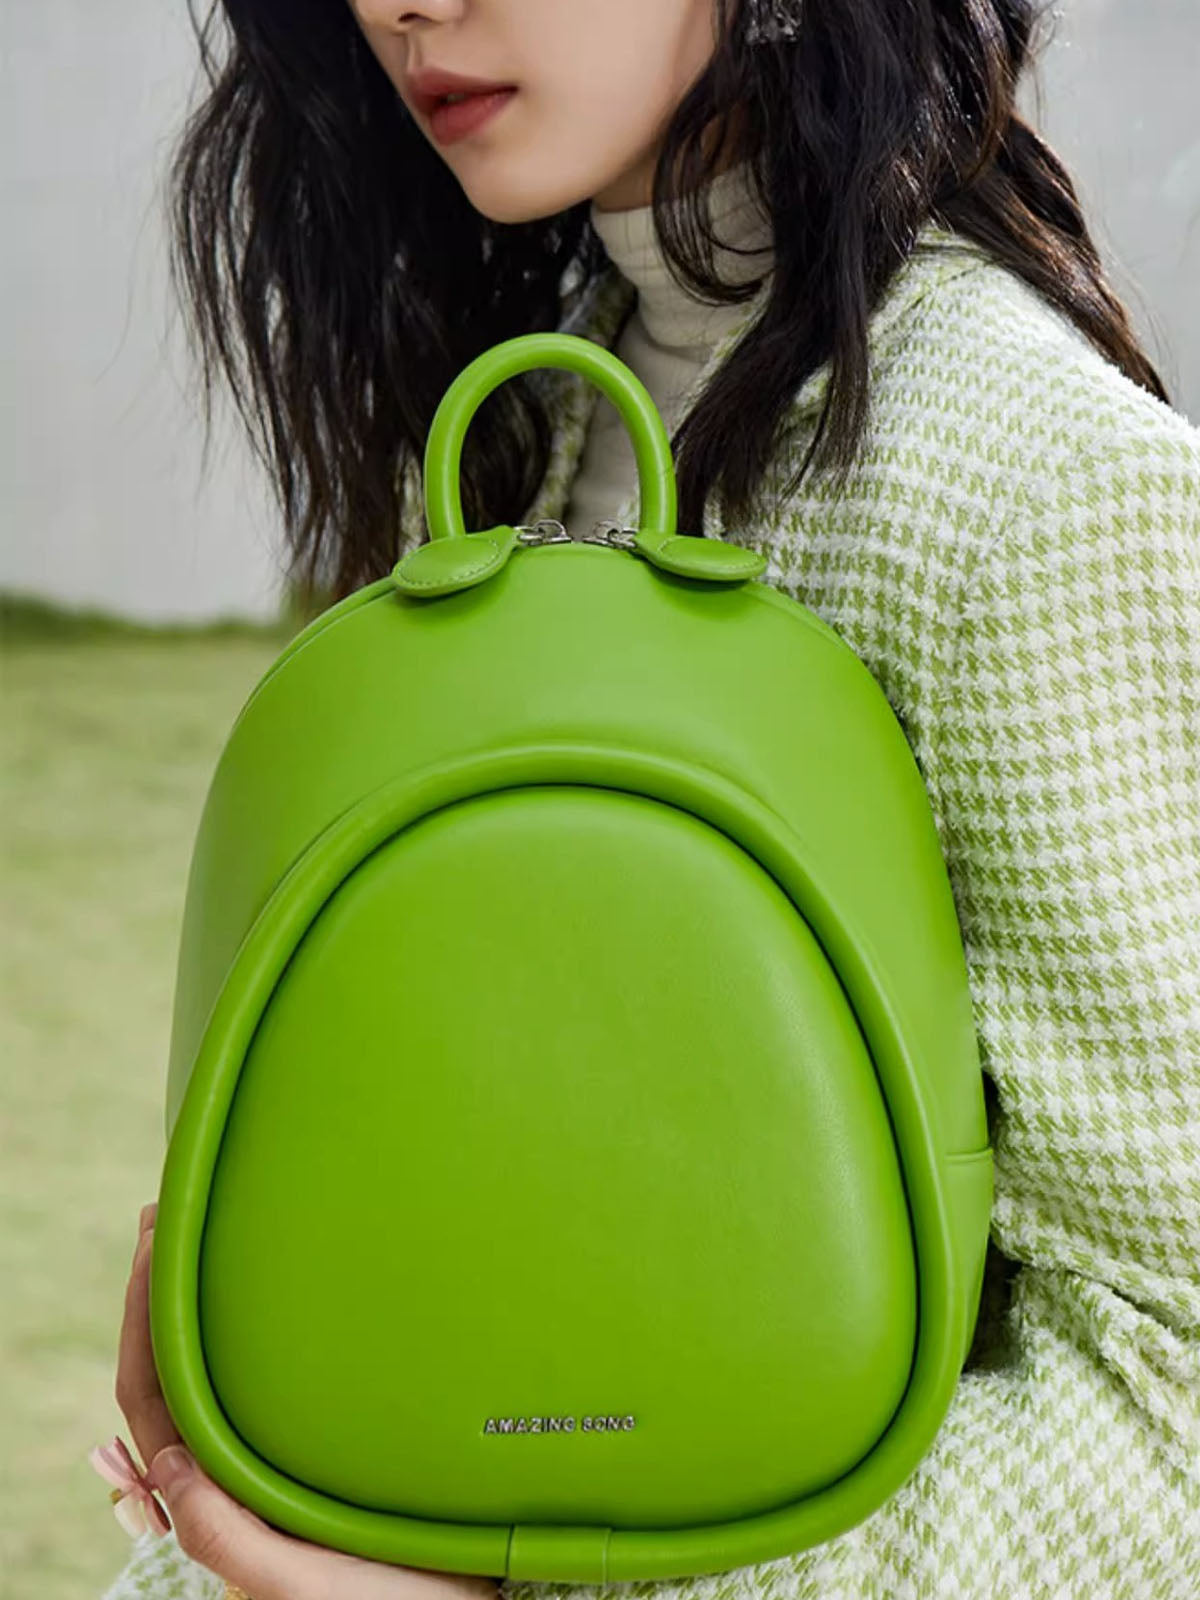 Amazing Song Soft Backpack Green - KNosce